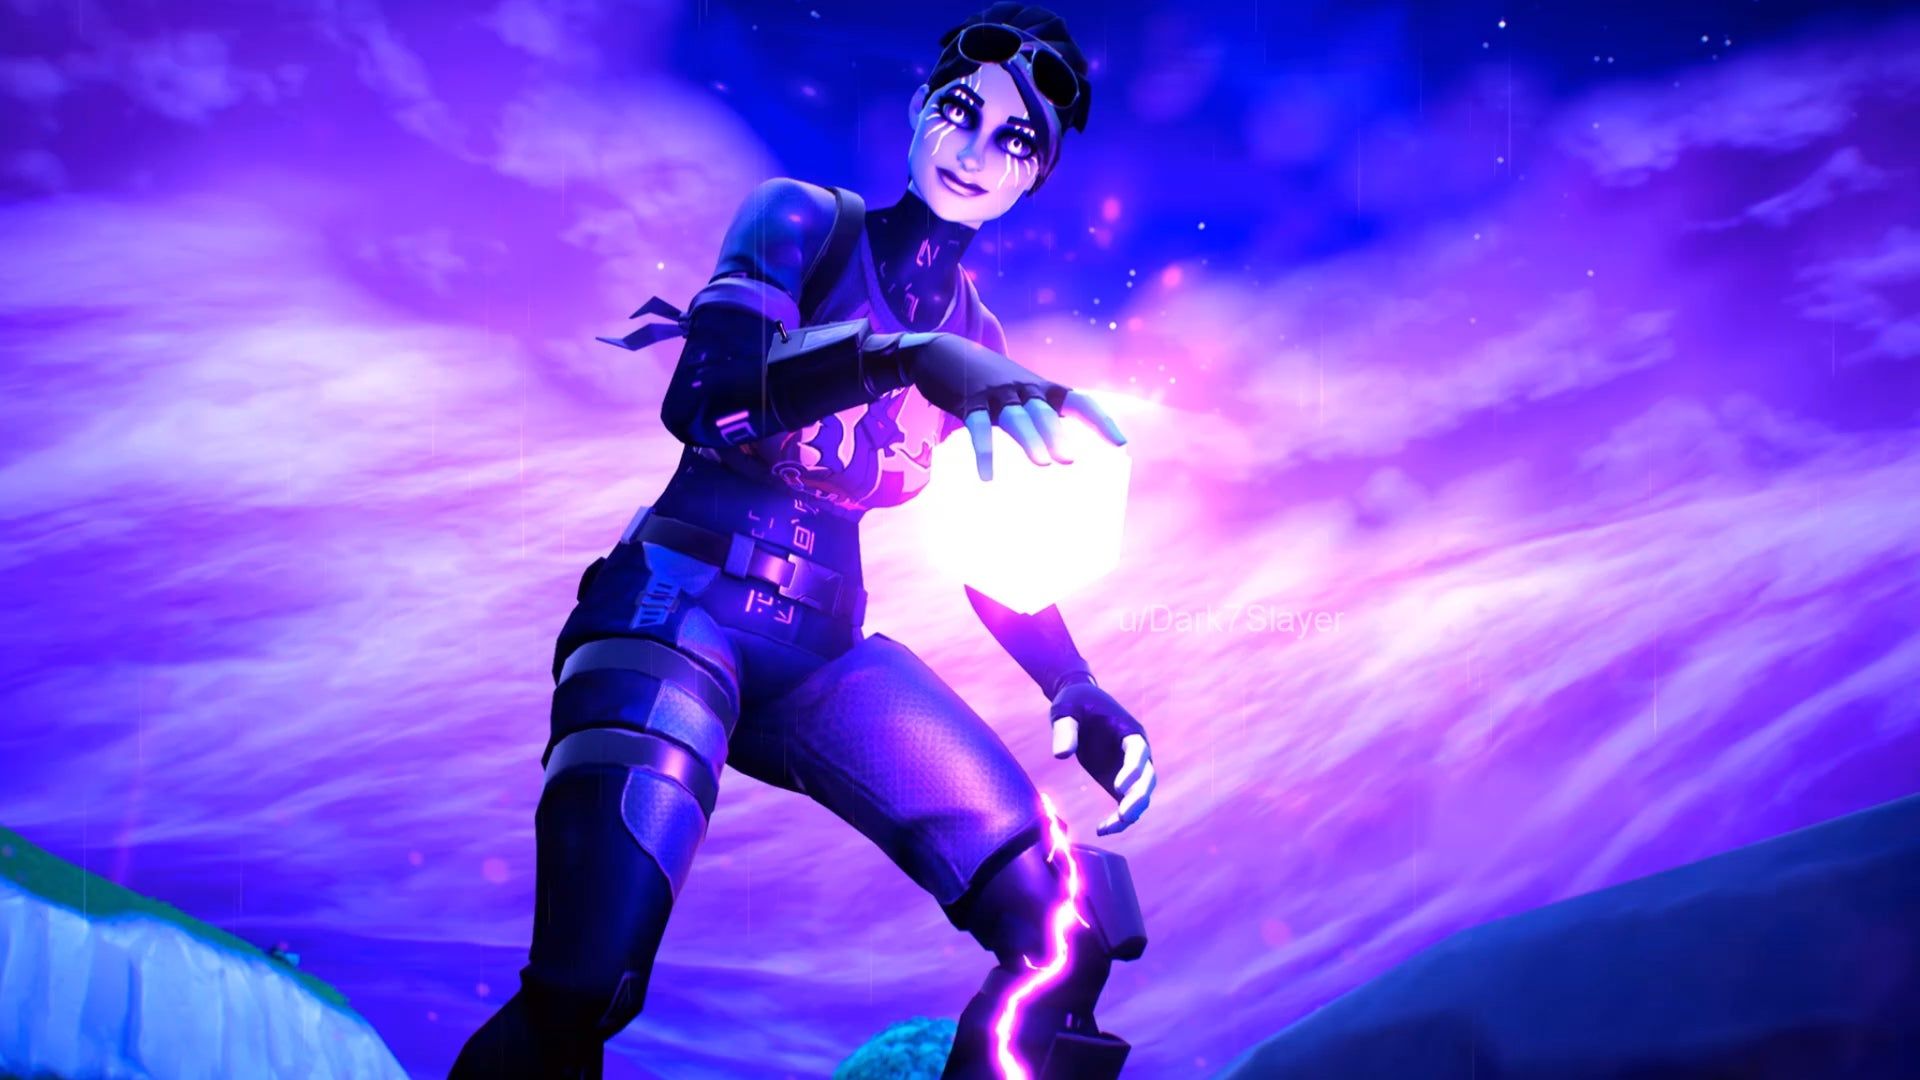 Been seeing lots of picture of Dark Bomber lately so I decided to